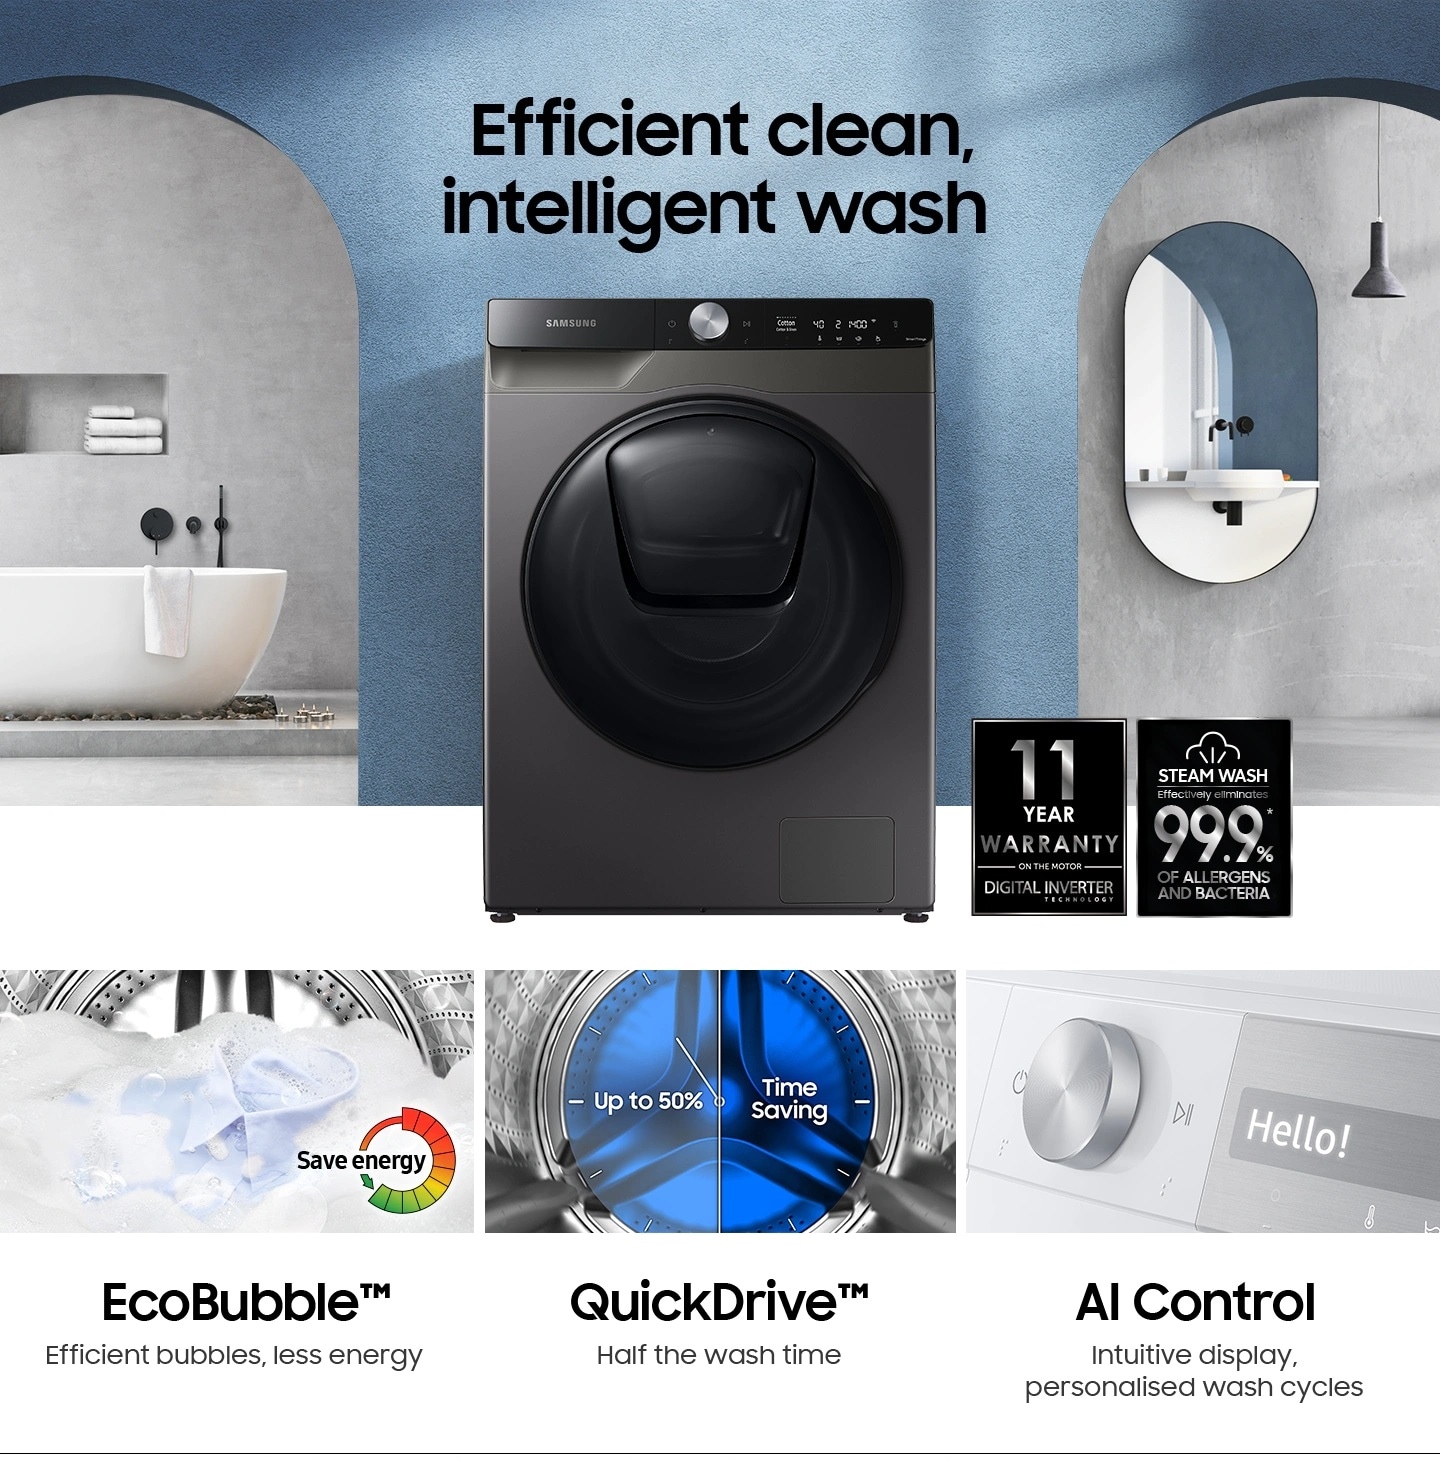 WW7500T is germ-free, and 10-year warranty with EcoBubble, QuickDrive, and AI Control functions.